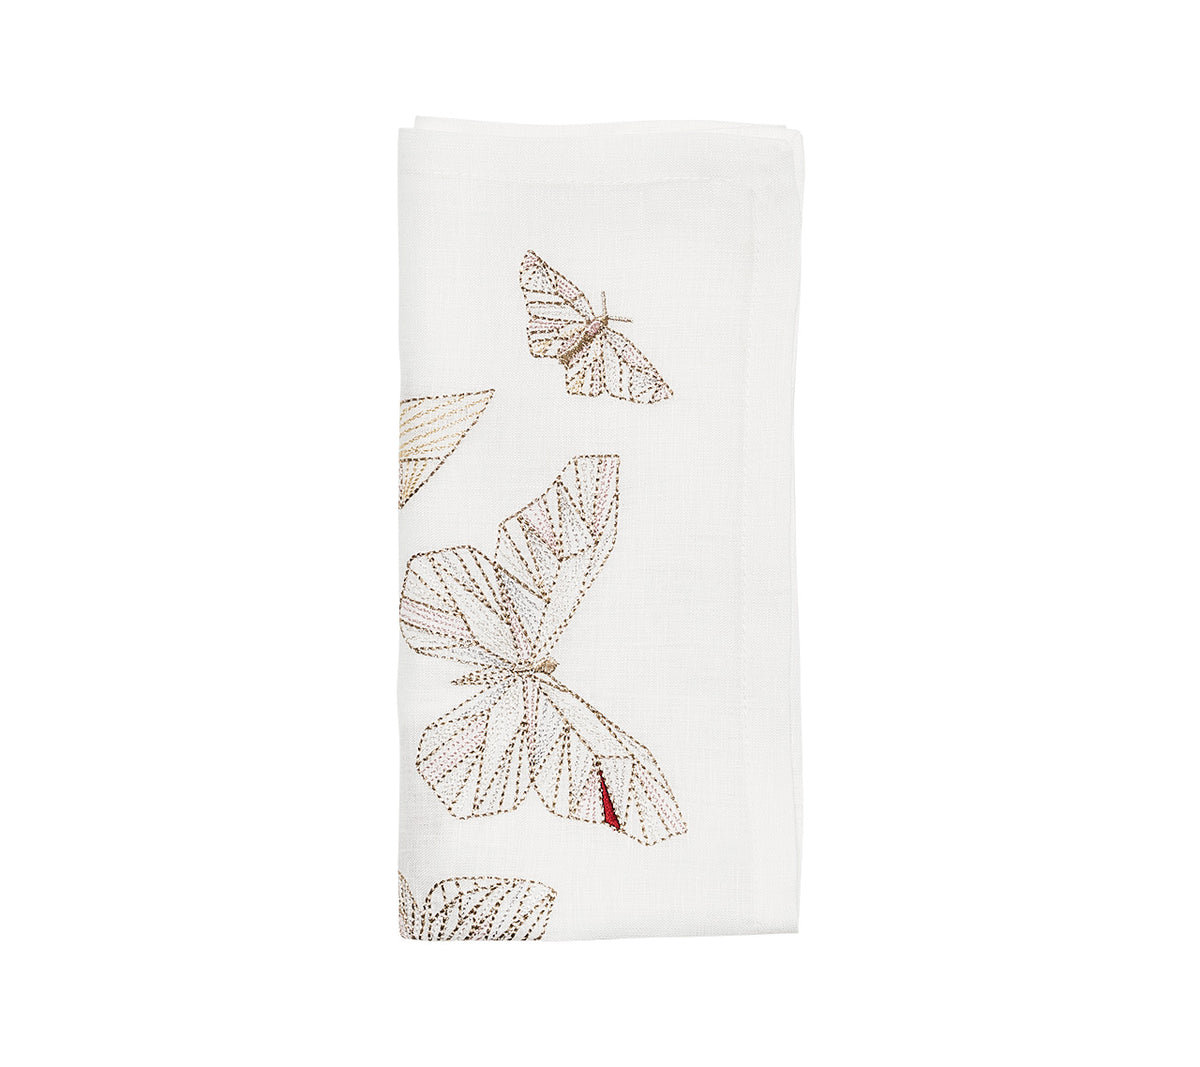 Diamant Butterflies Napkin in White & Multi, Set of 4 in a Gift Box